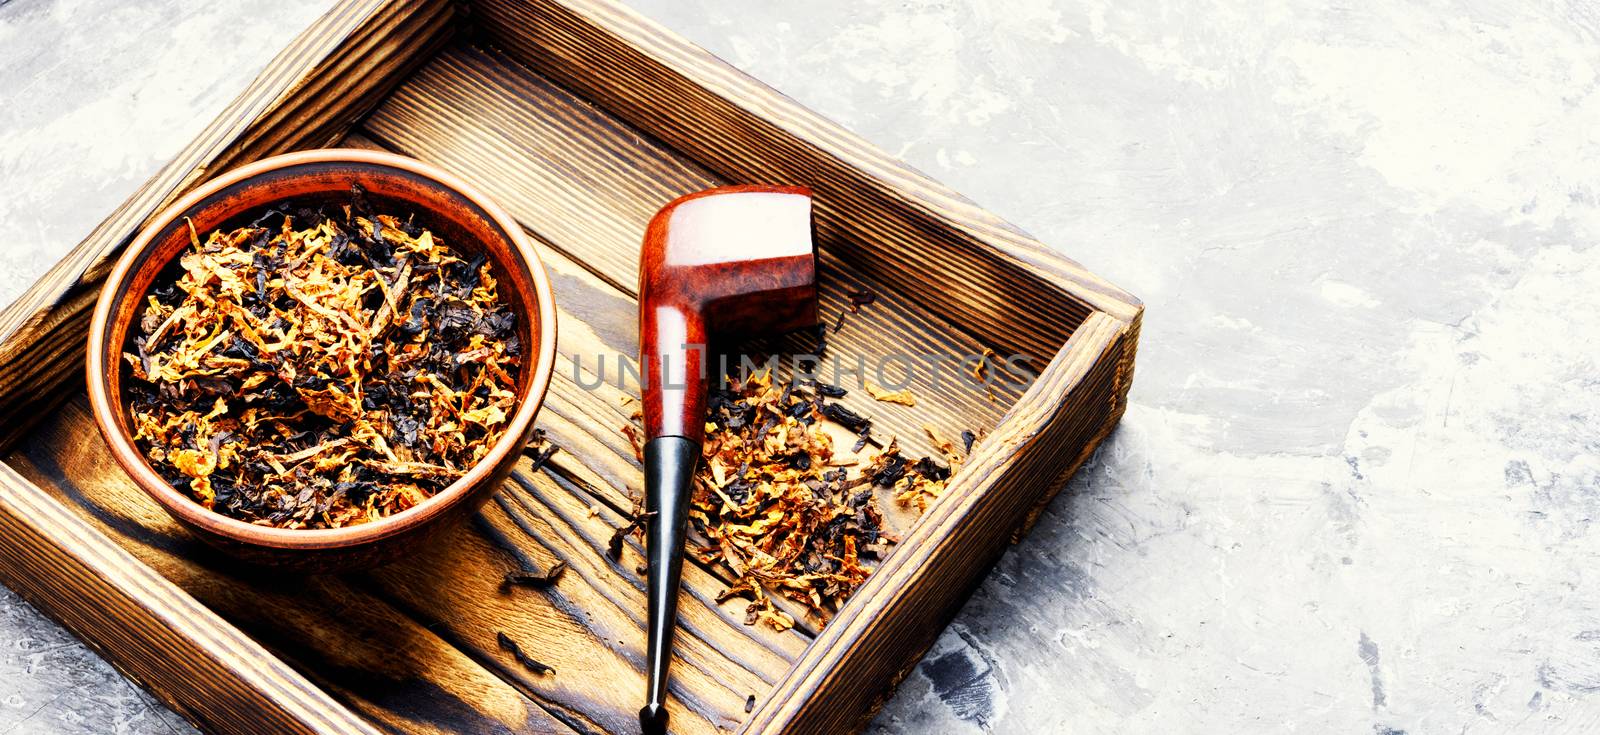 Classic tobacco smoking pipe with dried tobacco.Smoking.